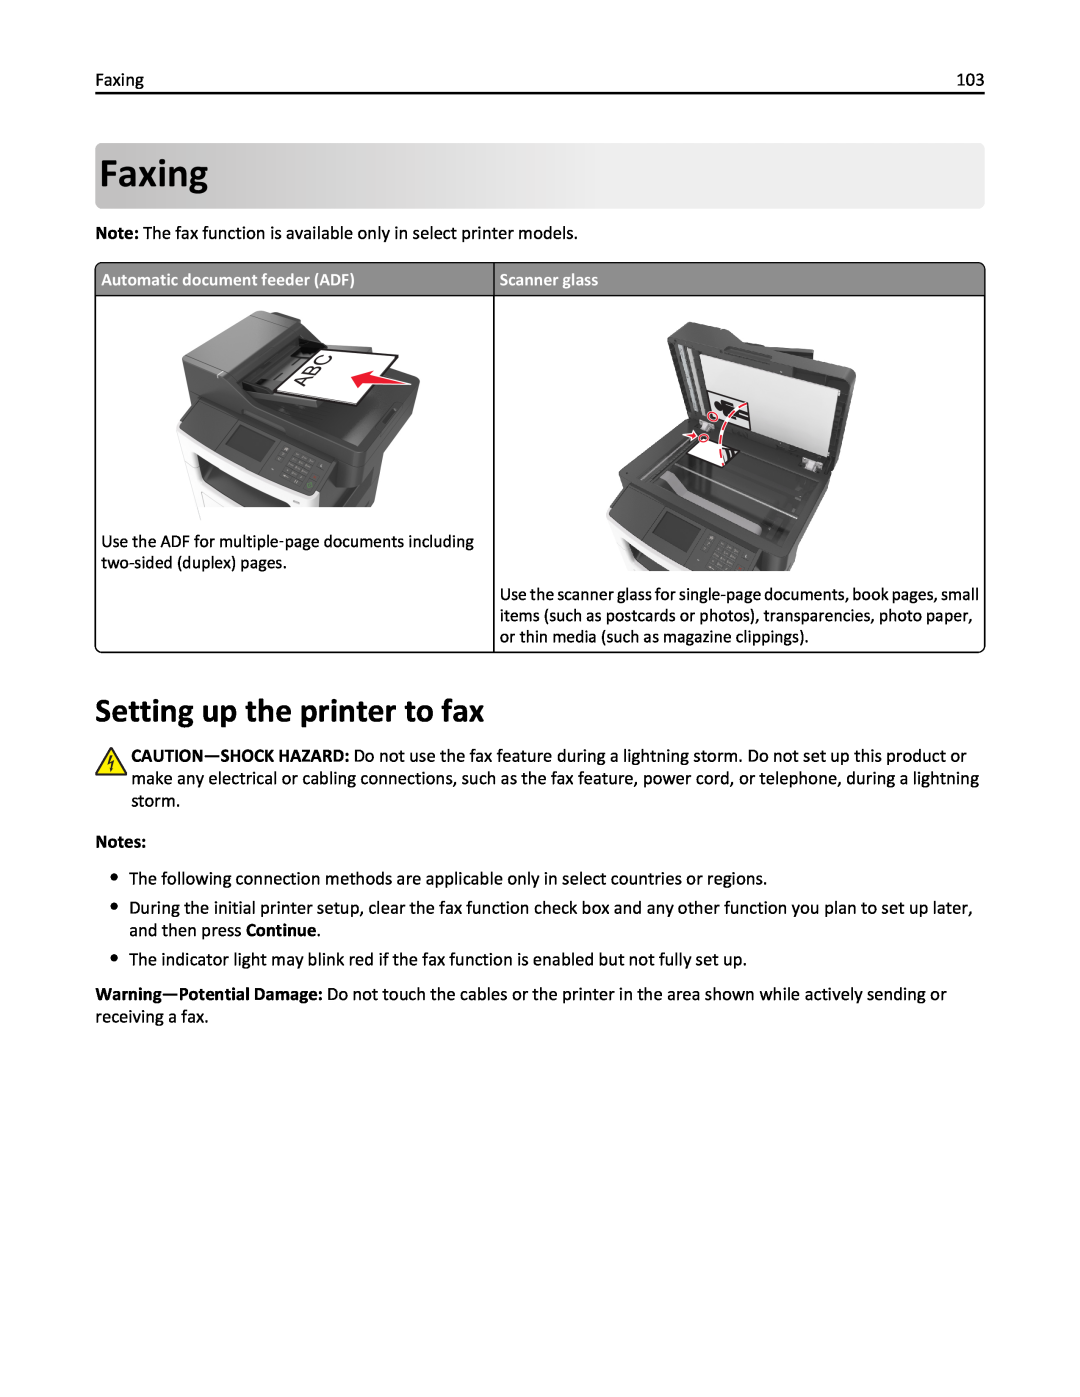 Lexmark 470, 35S5701, 670, 675, MX510, MX410DE manual Faxing, Setting up the printer to fax 